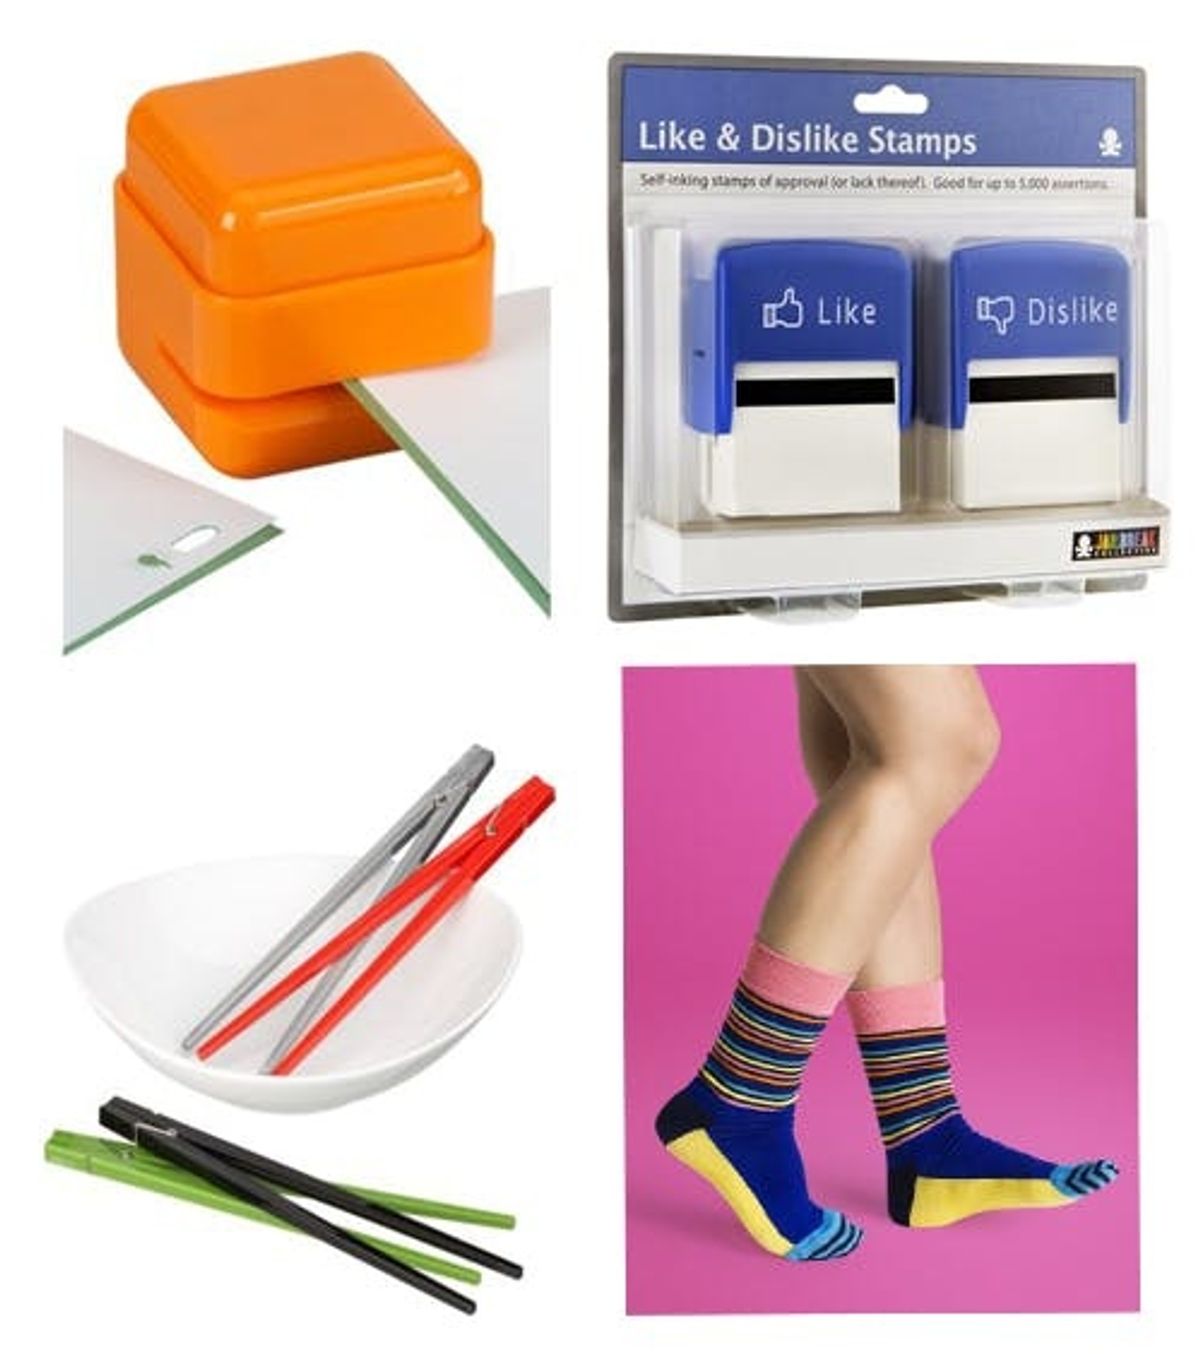 20 Stocking Stuffers For Under $20